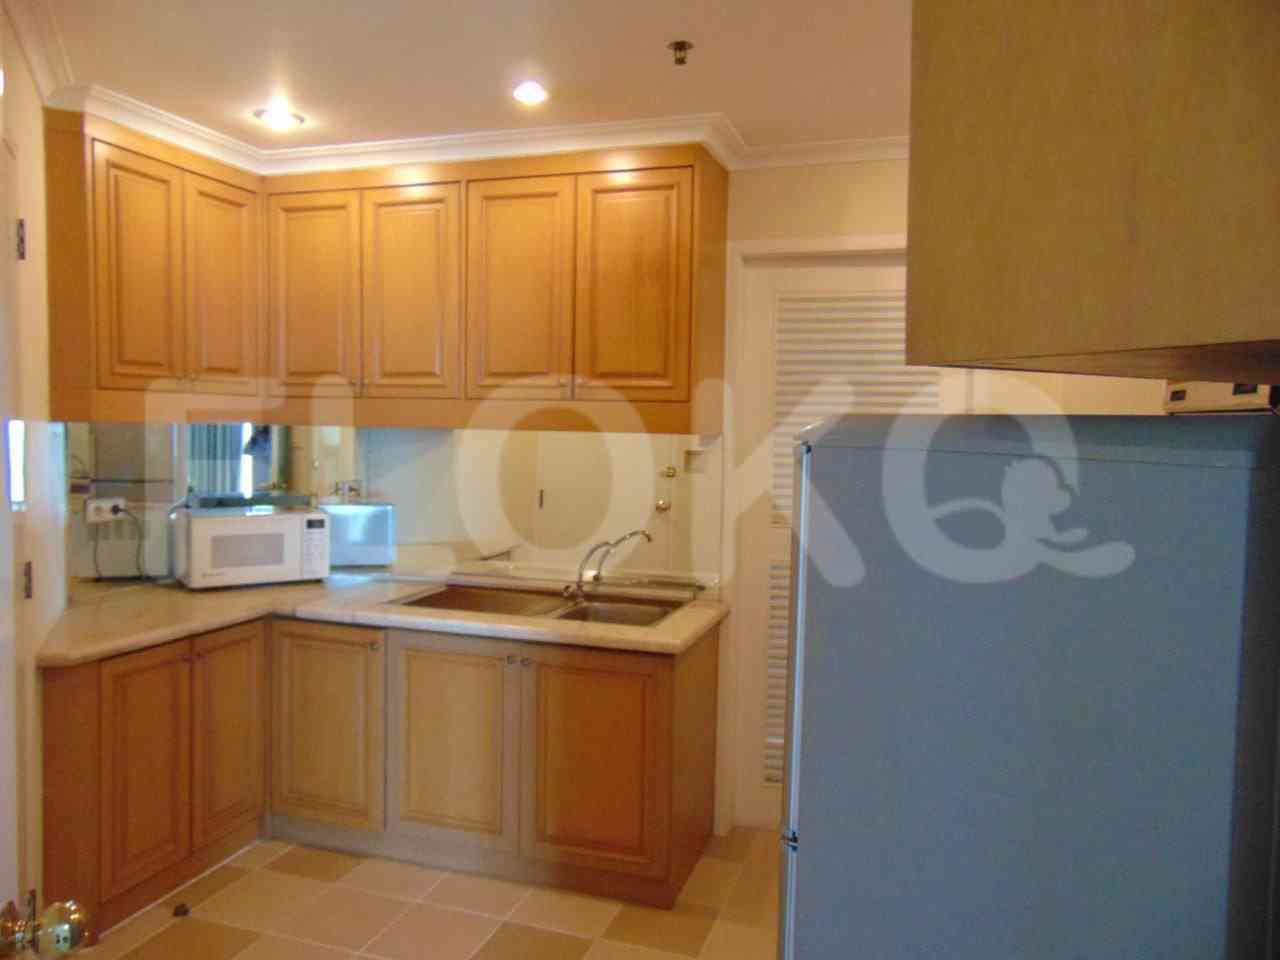 2 Bedroom on 15th Floor for Rent in Batavia Apartment - fbe827 7